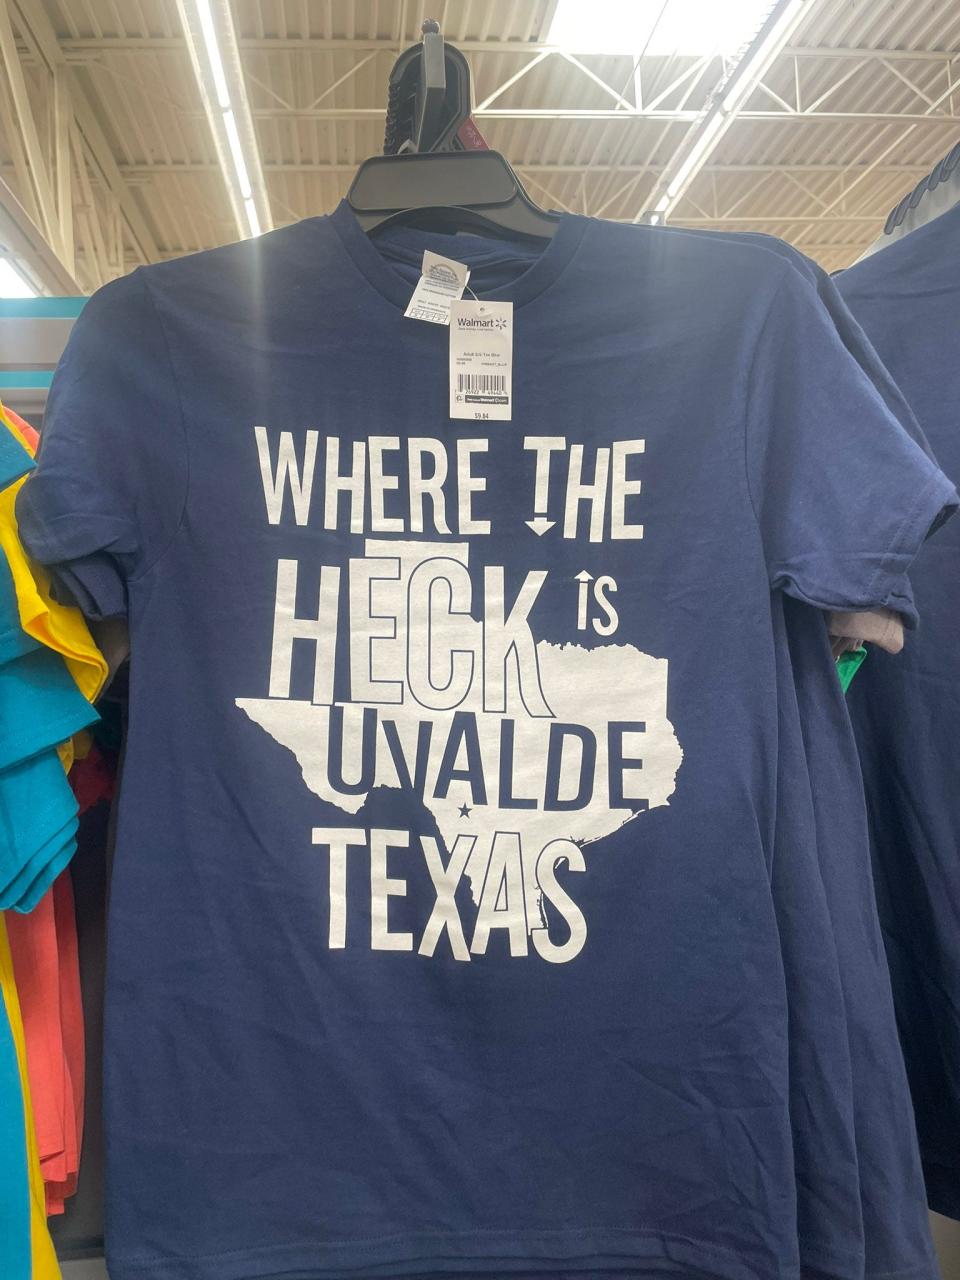 A shirt sold at Walmart. Brett Cross, father of Uziyah Garcia, a 10-year-old killed in the Robb Elementary School shooting, called the retail giant out for the shirt on social media. The thread prompted the store to issue an apology.